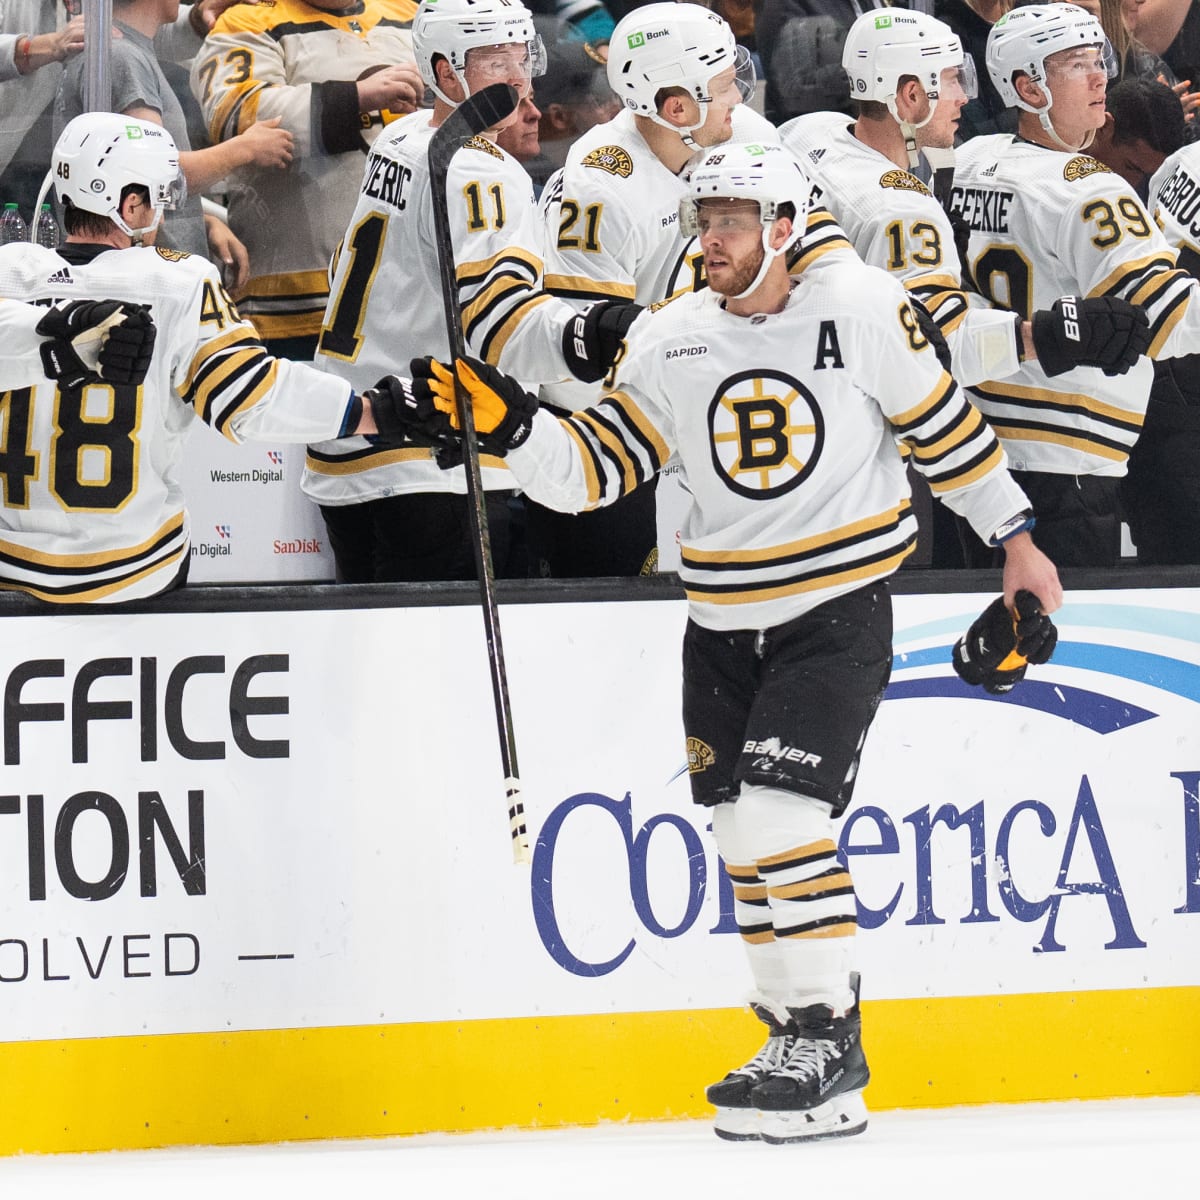 Jake DeBrusk scratched for being late to Bruins team meeting